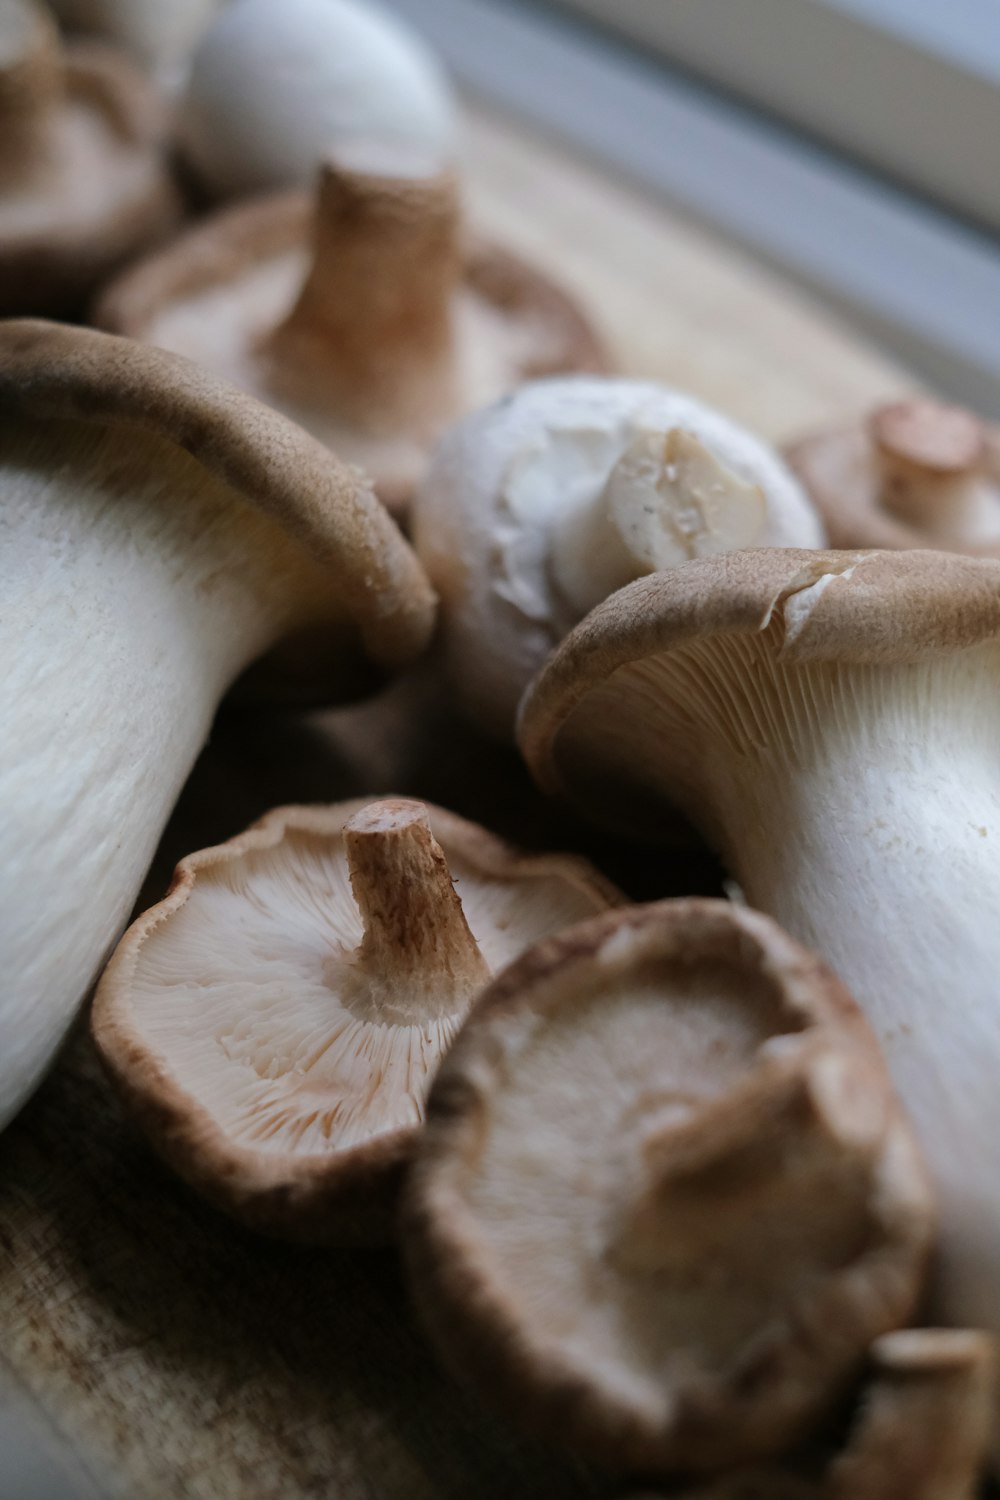 white and brown mushroom in close up photography